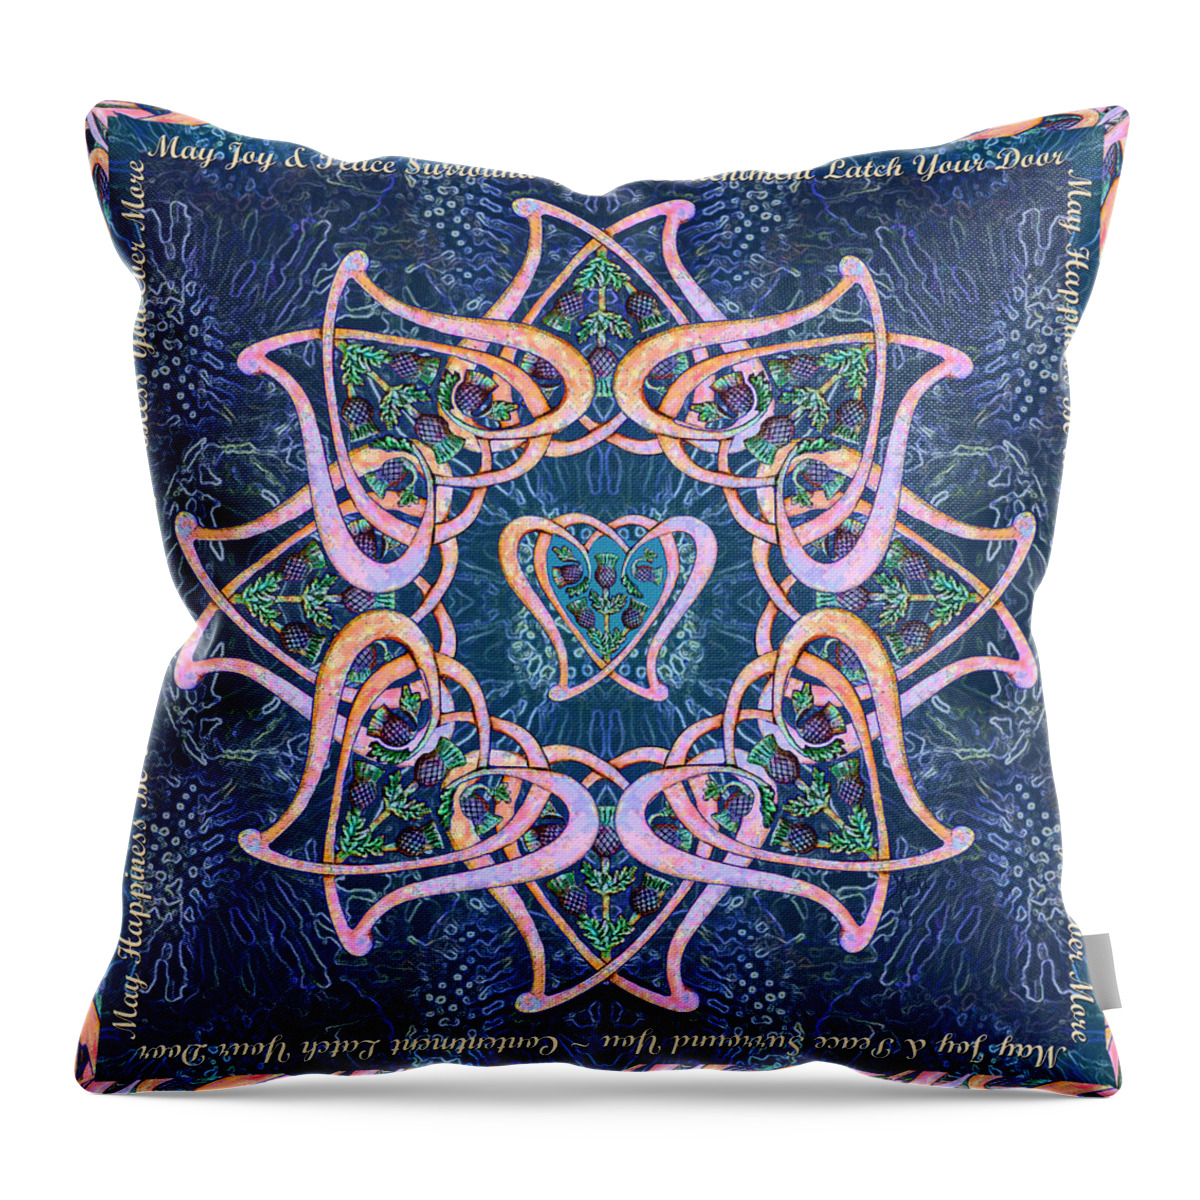 Scottish Blessing Throw Pillow featuring the digital art Scottish Blessing Celtic Hearts Duvet by Michele Avanti